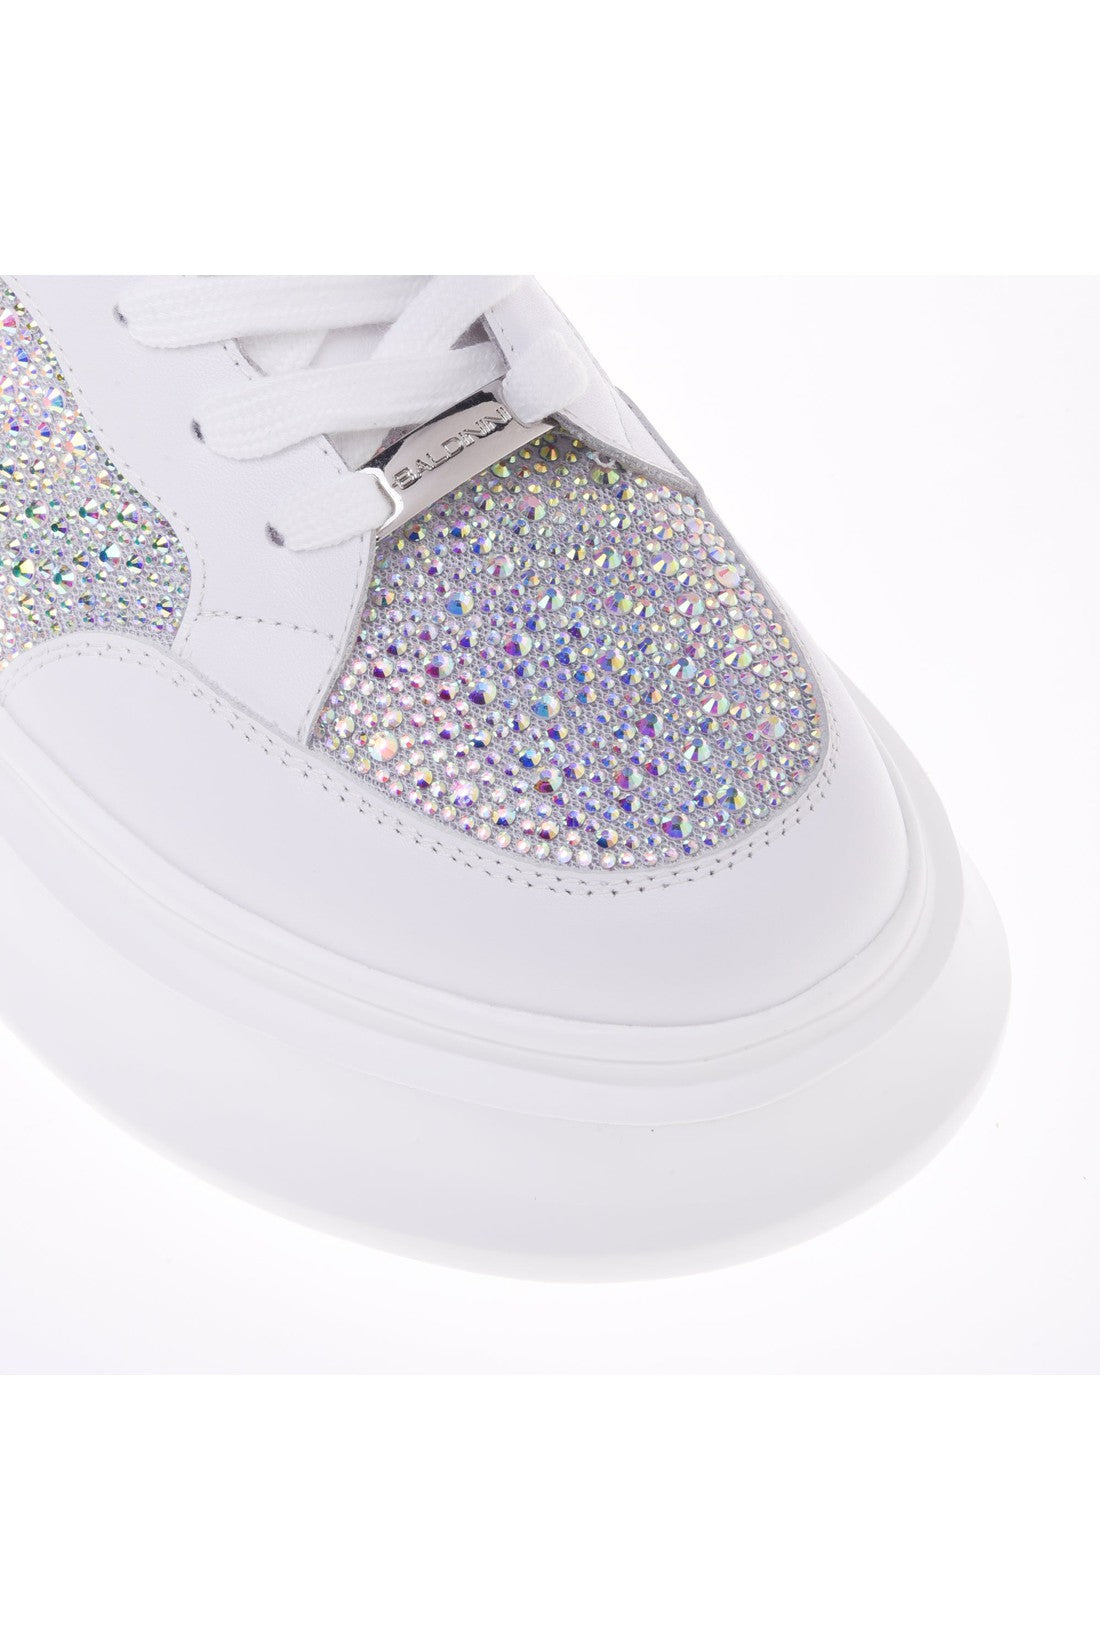 BALDININI-OUTLET-SALE-Sneaker-in-white-calfskin-with-rhinestones-Sneaker-ARCHIVE-COLLECTION-4_c7154208-b997-4c90-a88d-aab533d53f8b.jpg